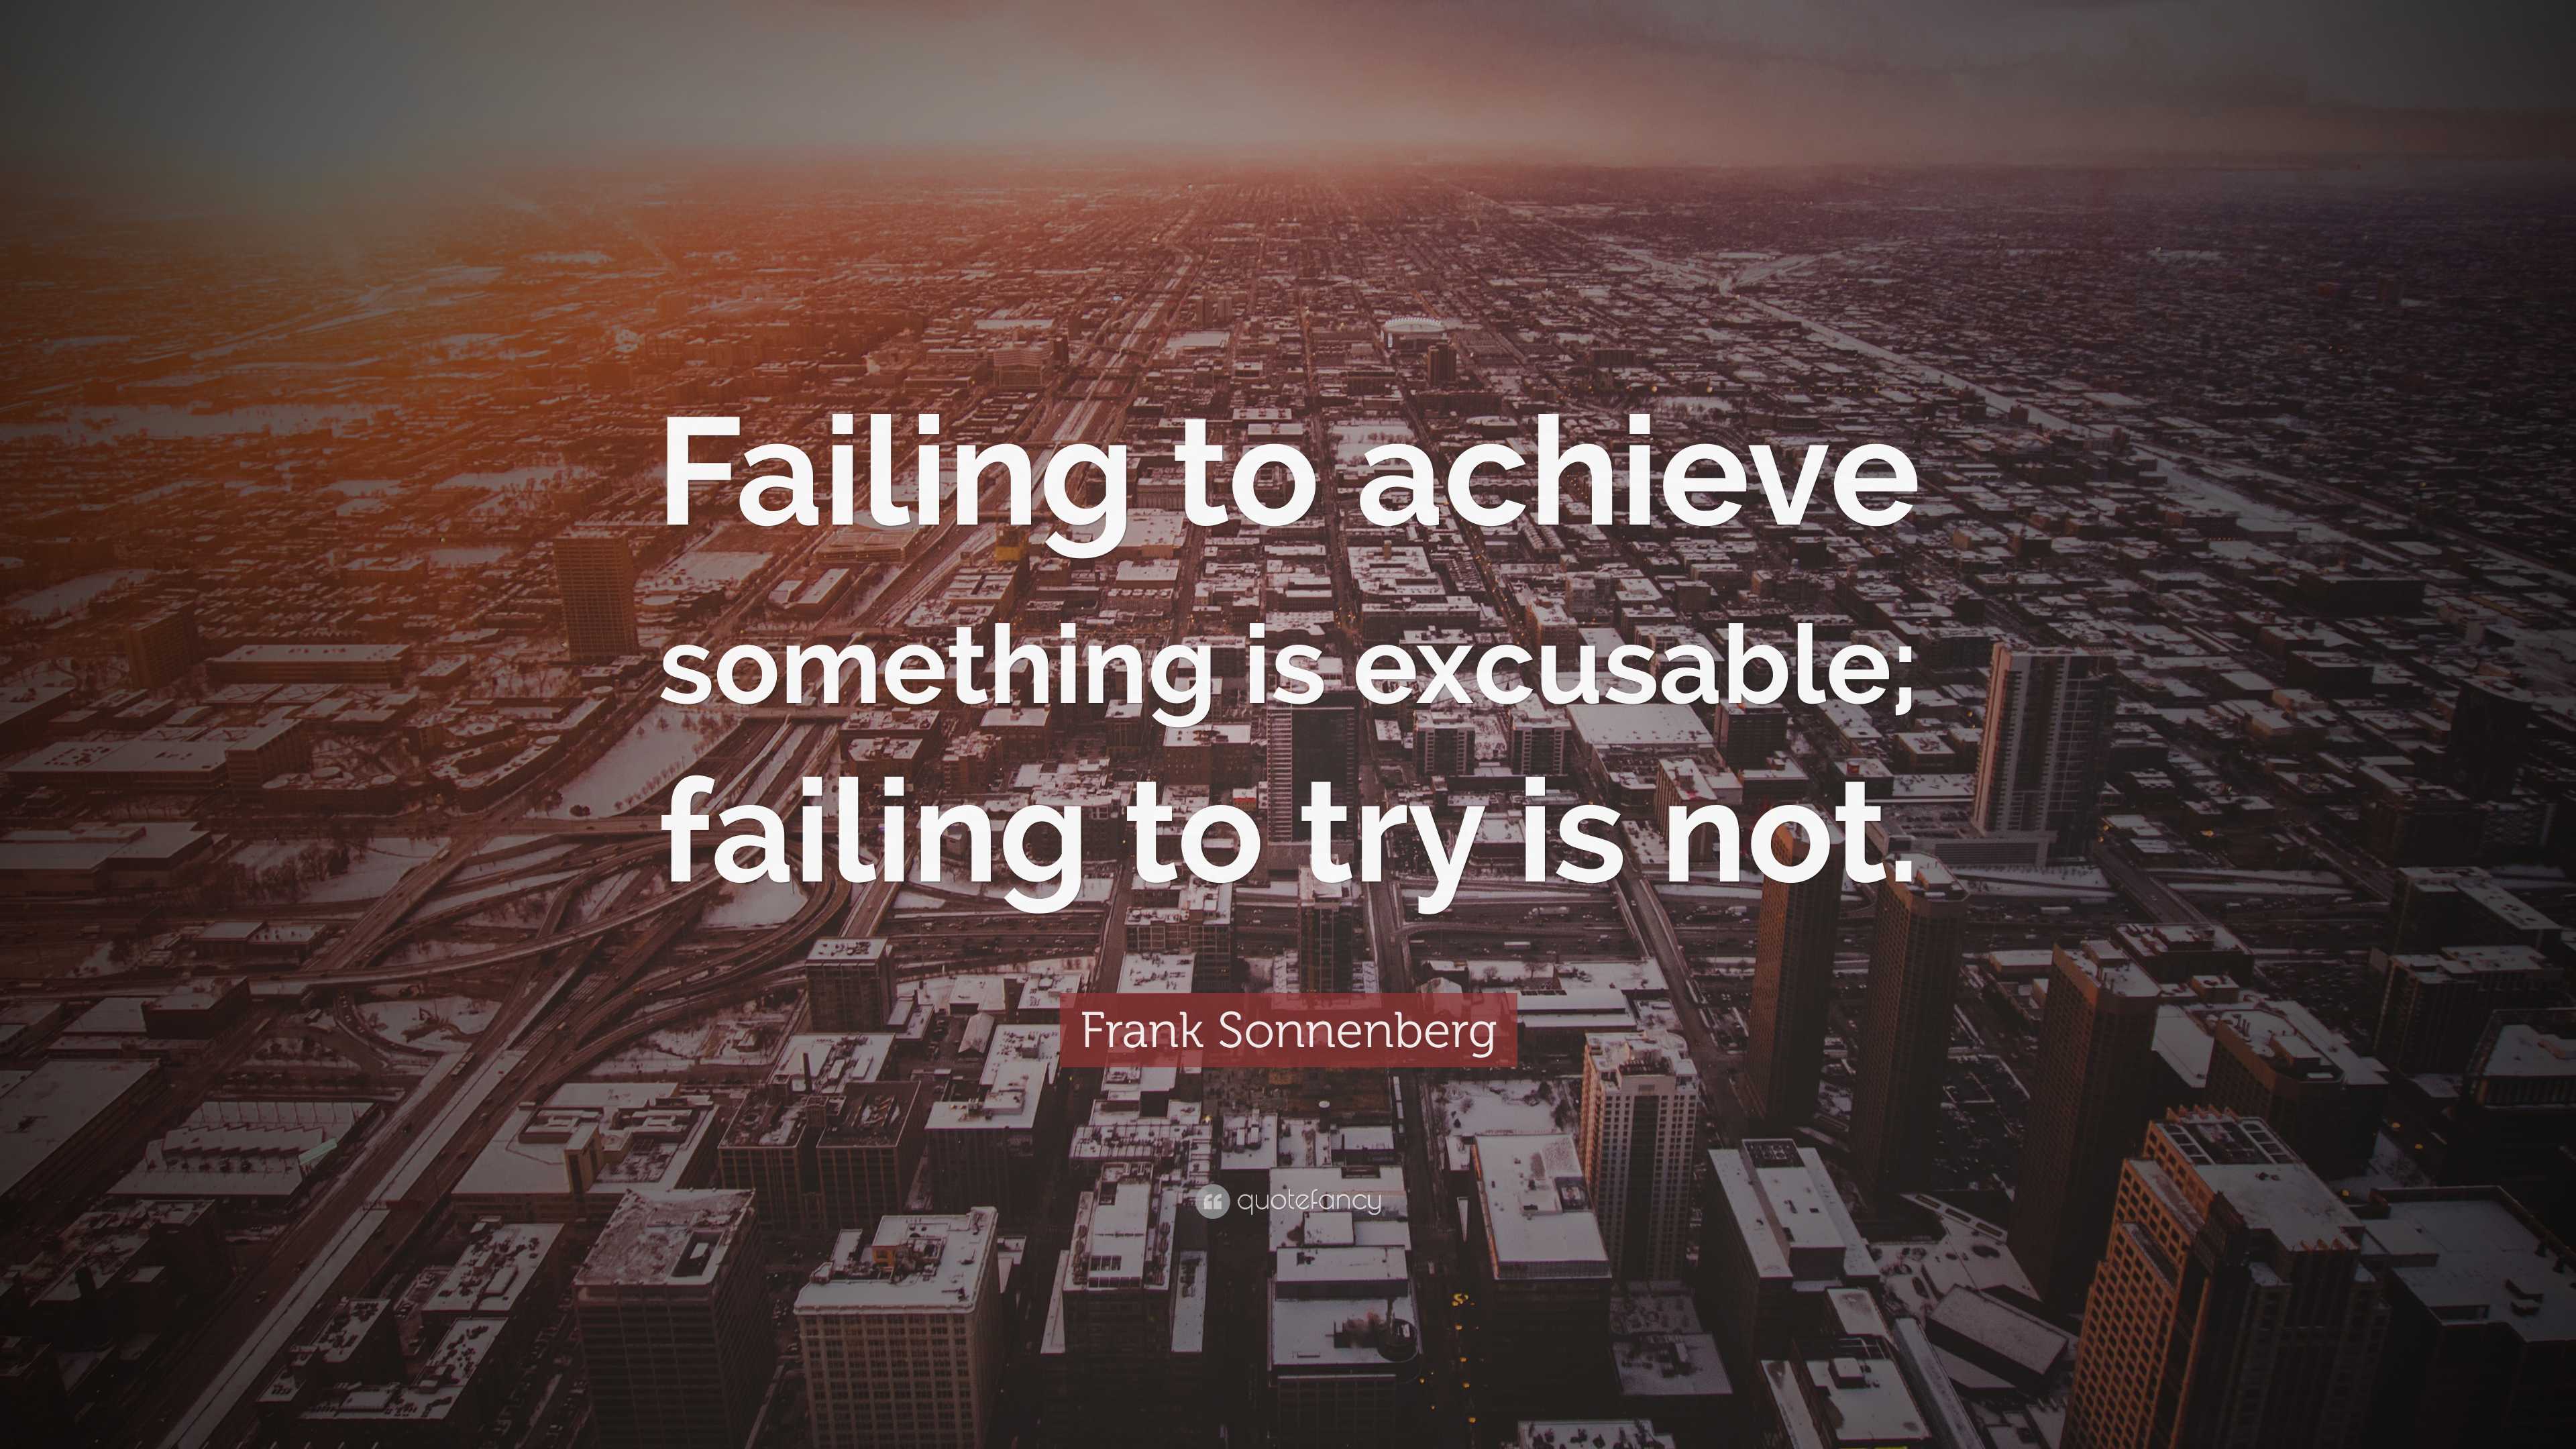 Frank Sonnenberg Quote: “Failing to achieve something is excusable ...